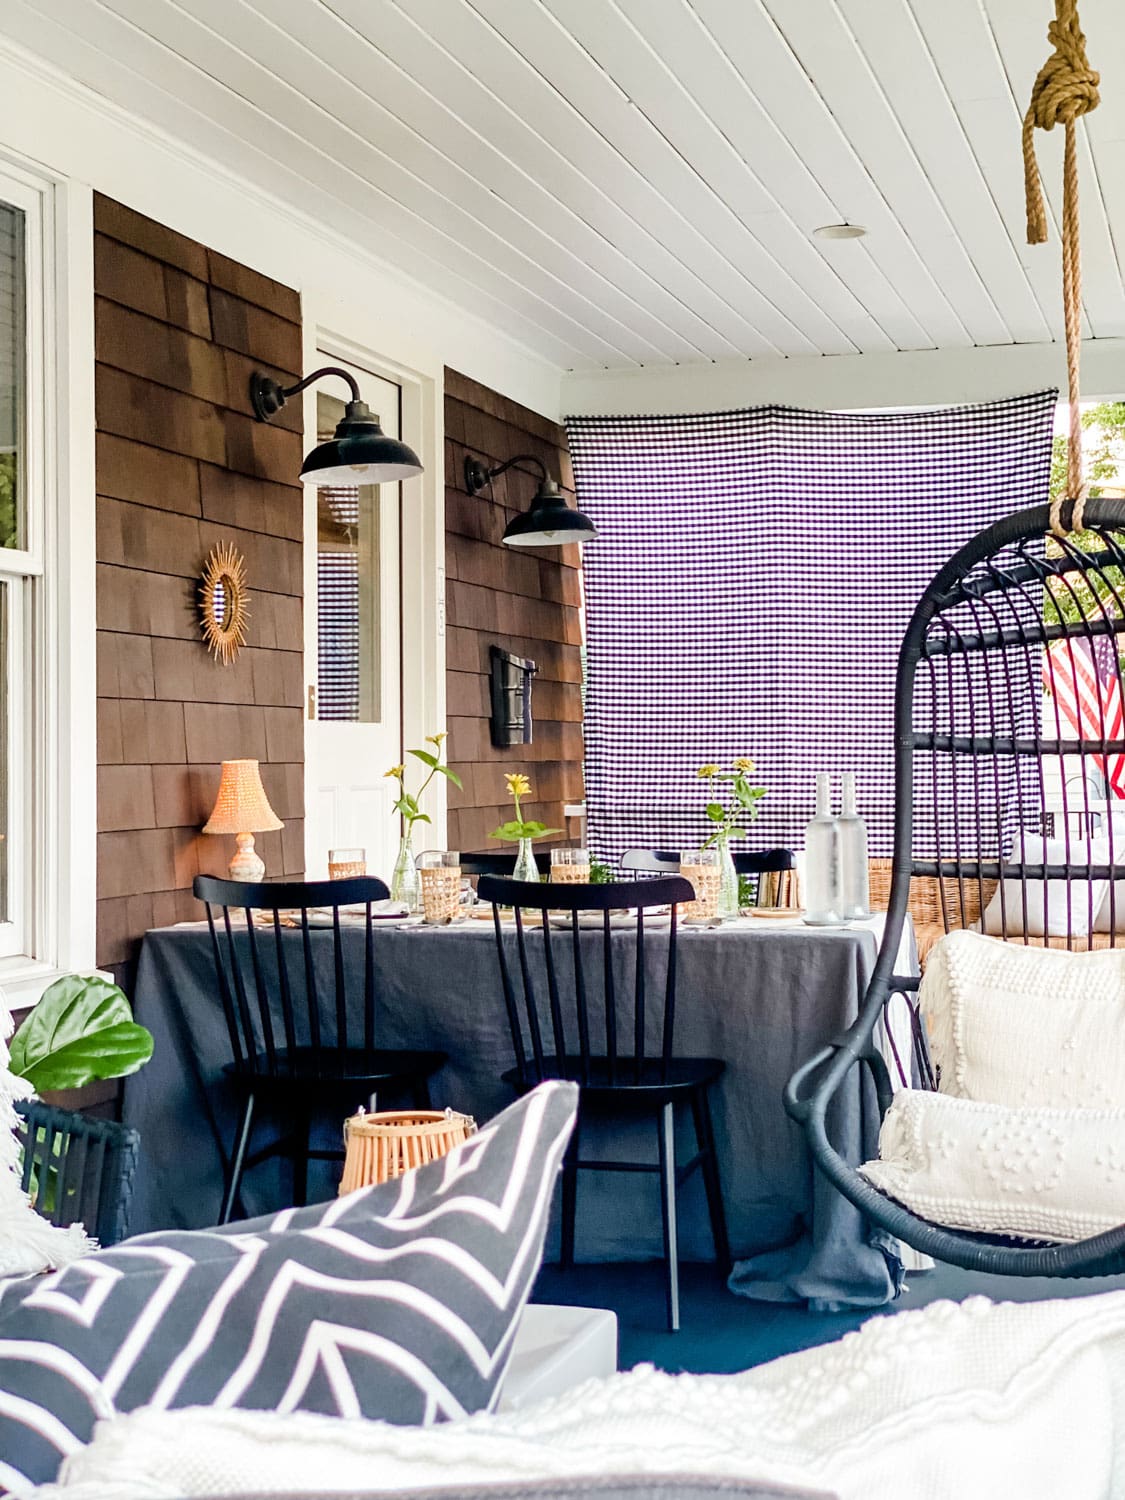 Cozy outdoor space on the porch